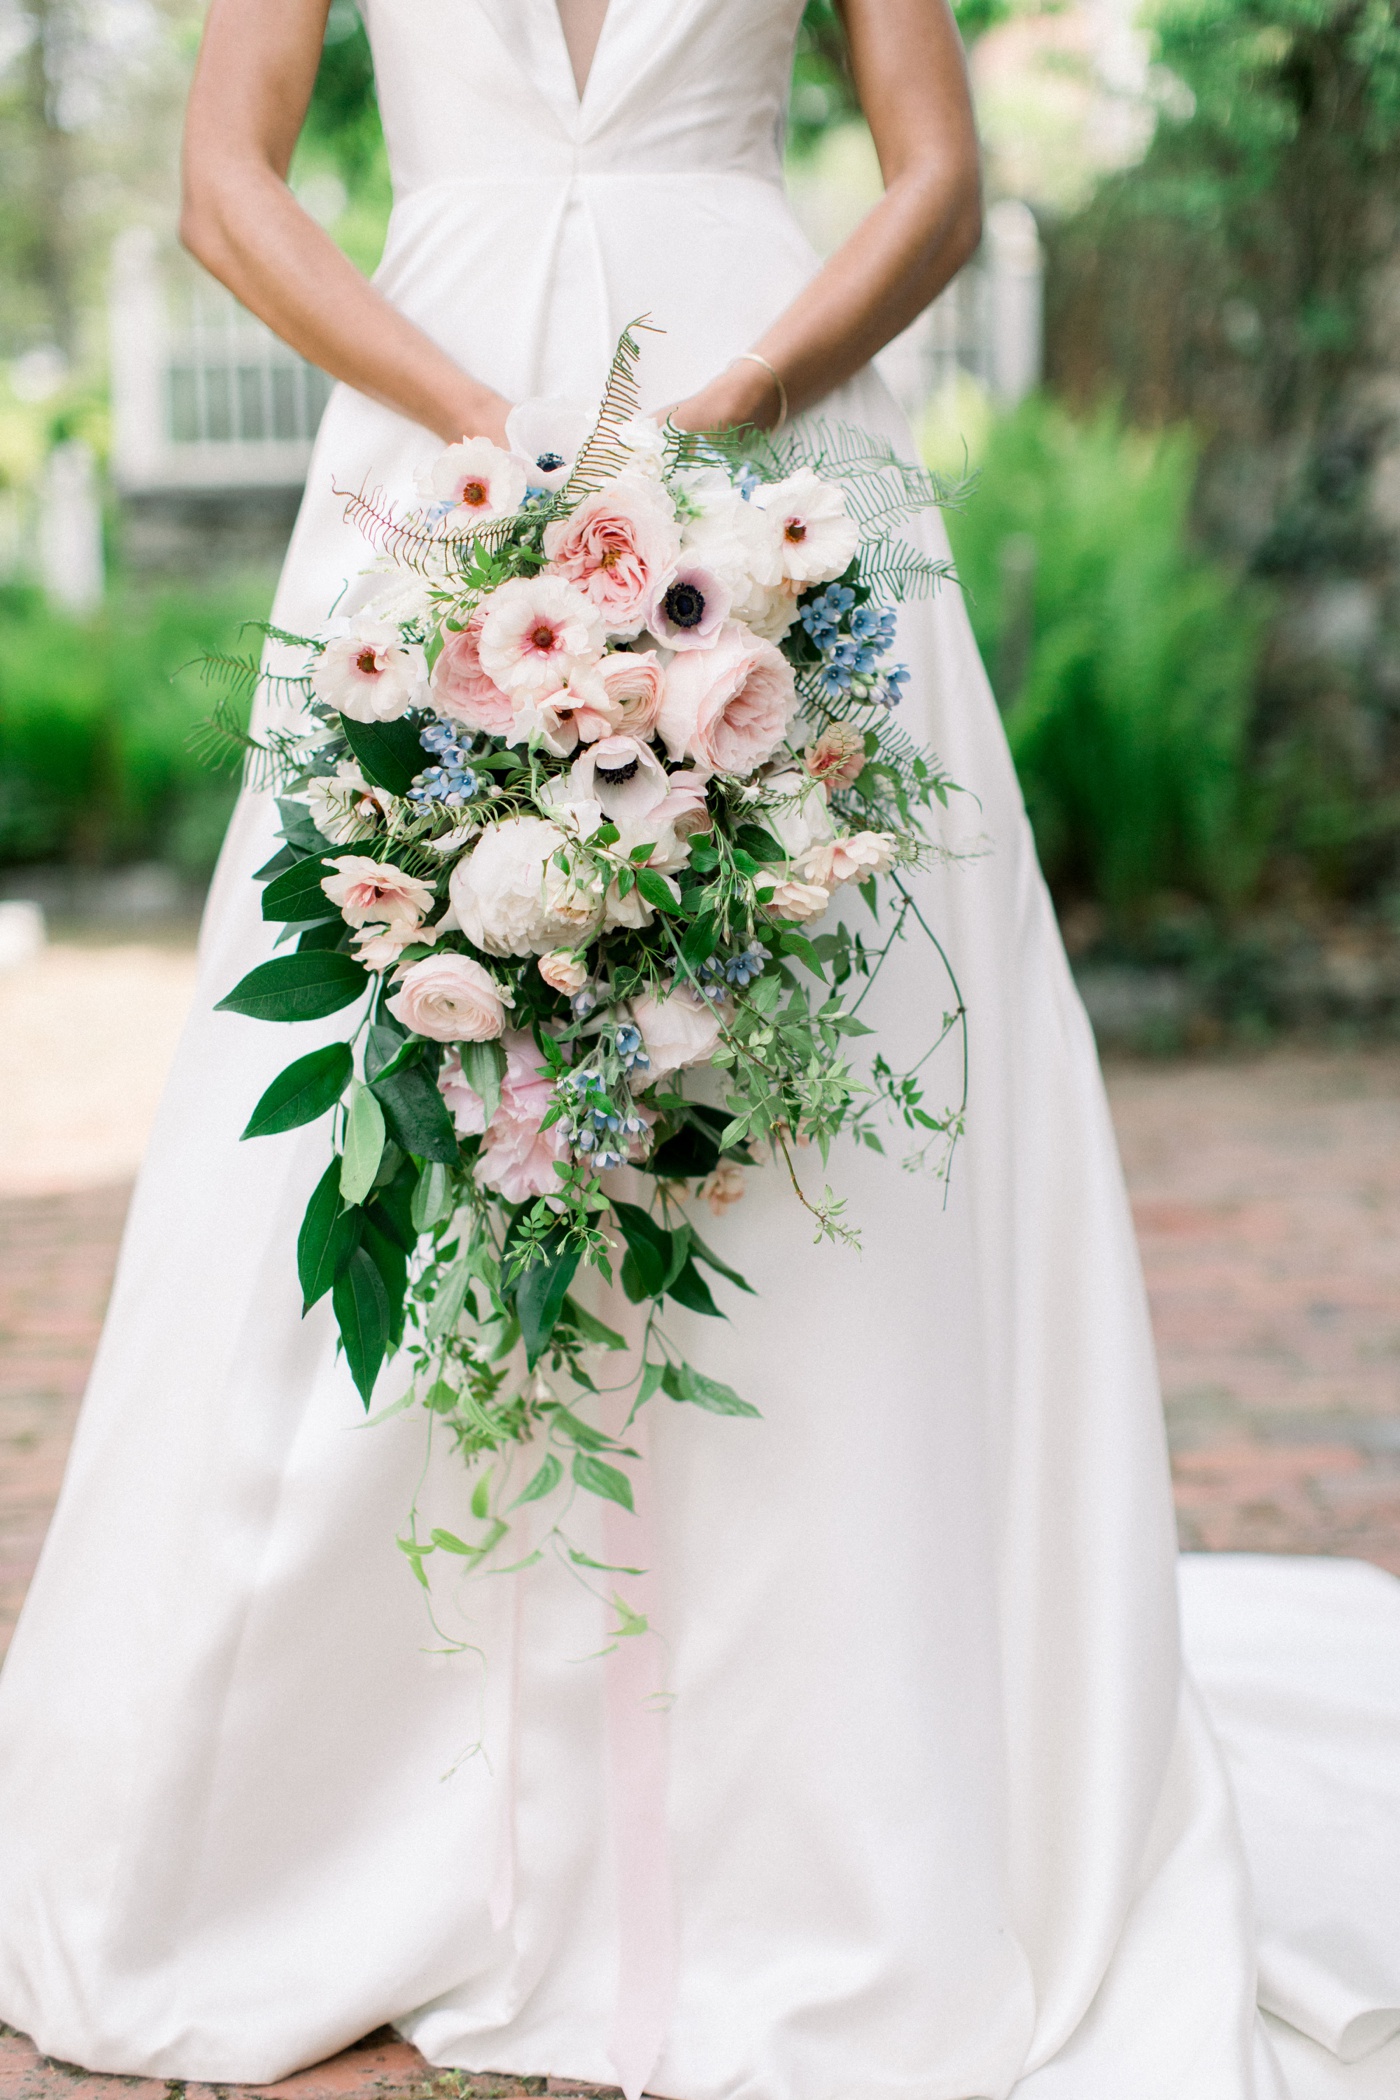 Blush wedding bouquet filled with anemones, garden roses, and butterfly ranunculus by Emily Herzig